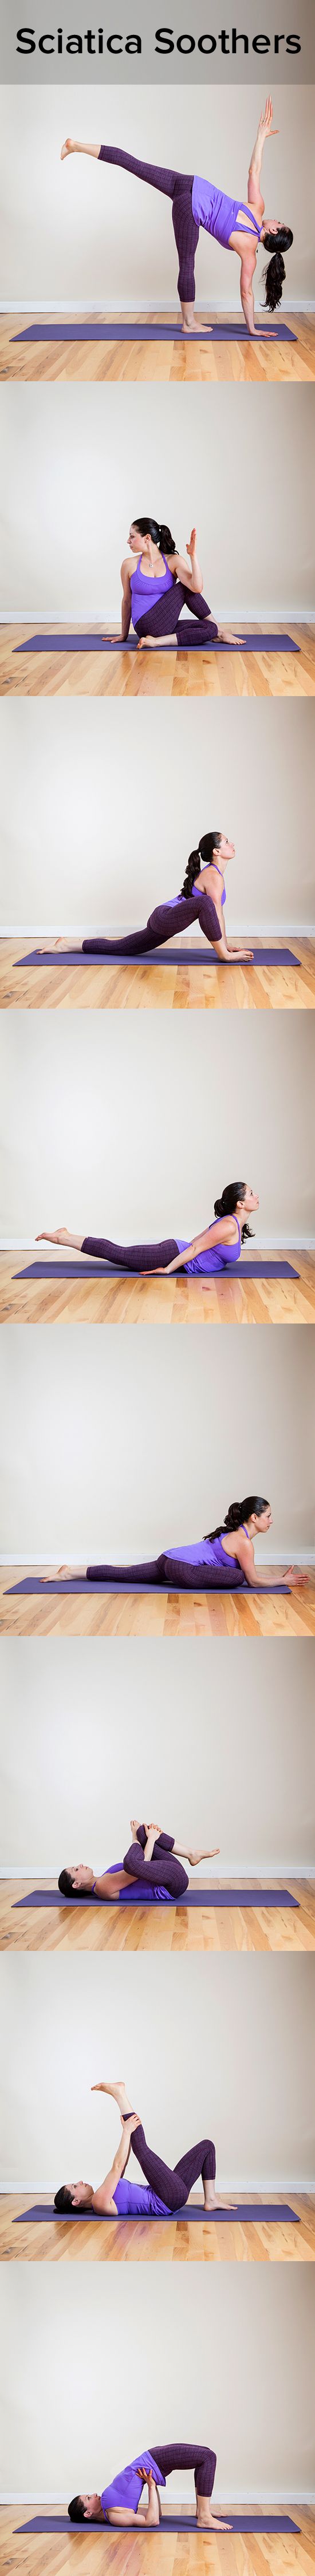 Yoga For Sciatica: Try These 5 Poses For Relief